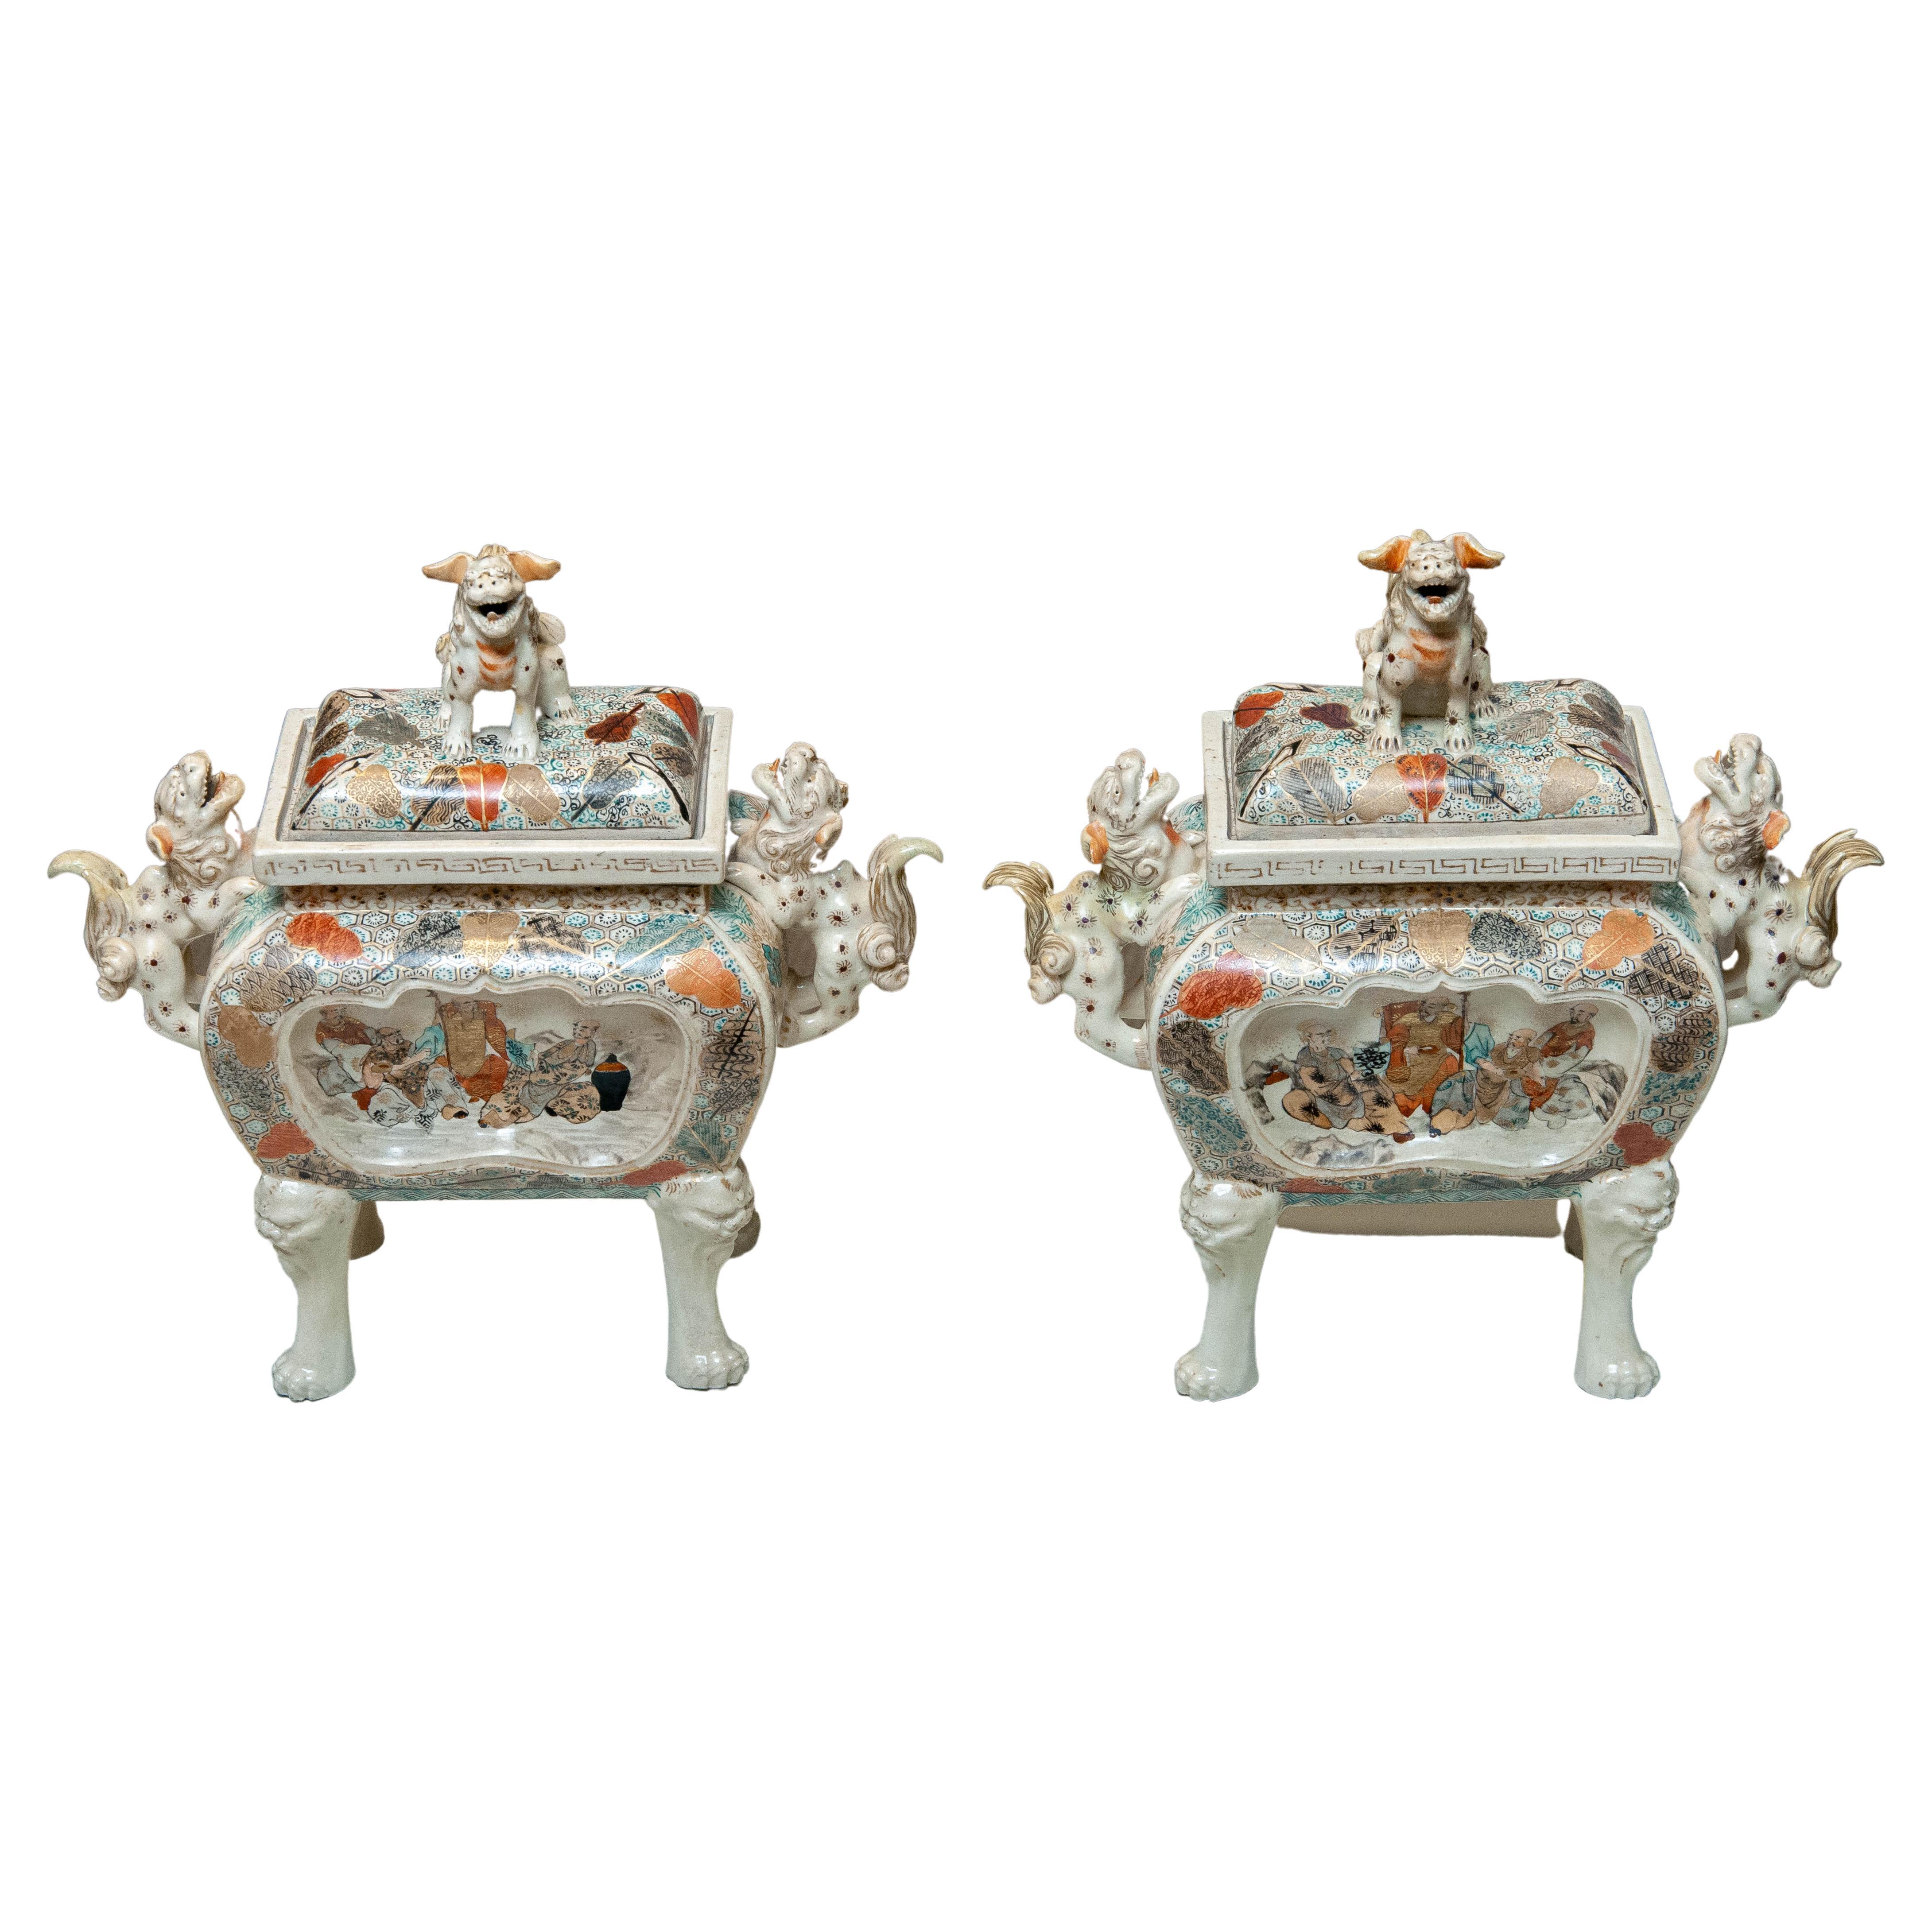 Absolutely rare and beautiful pair Chinese Qing dynasty porcelain and rich decorated 